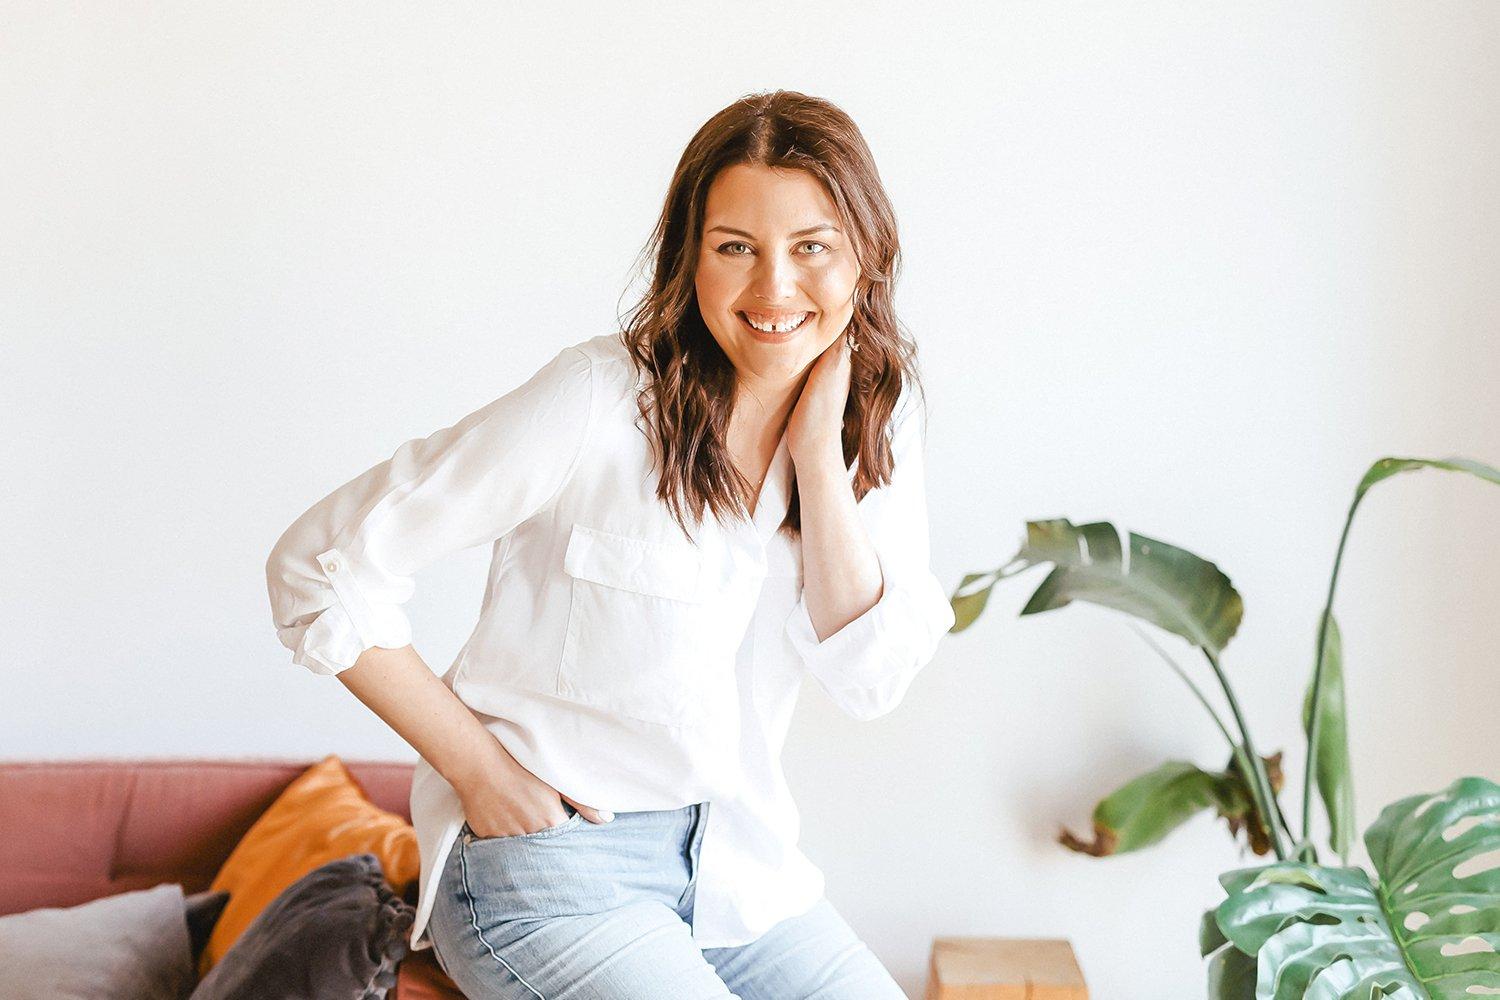 Sara Fortier, Outwitly's CEO and founder, sitting on the edge of a red couch against a white background